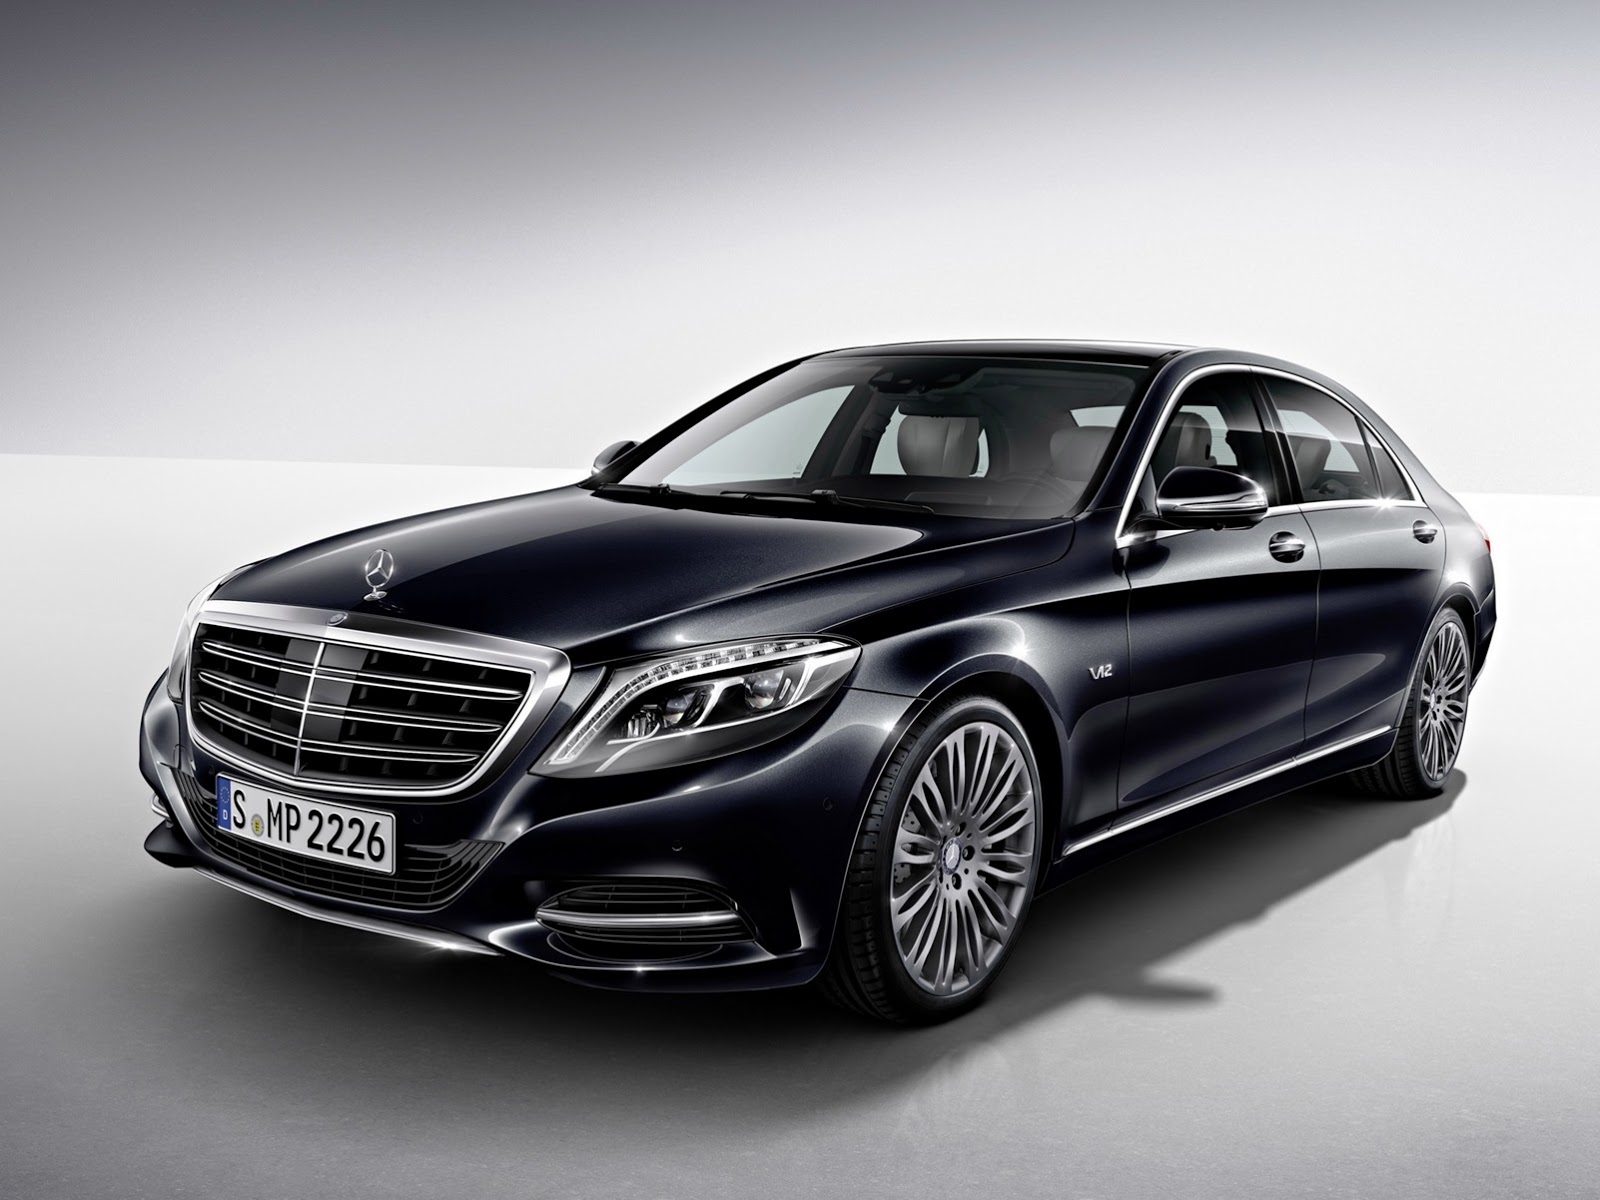 New Mercedes Benz S600 photo gallery Autocar India